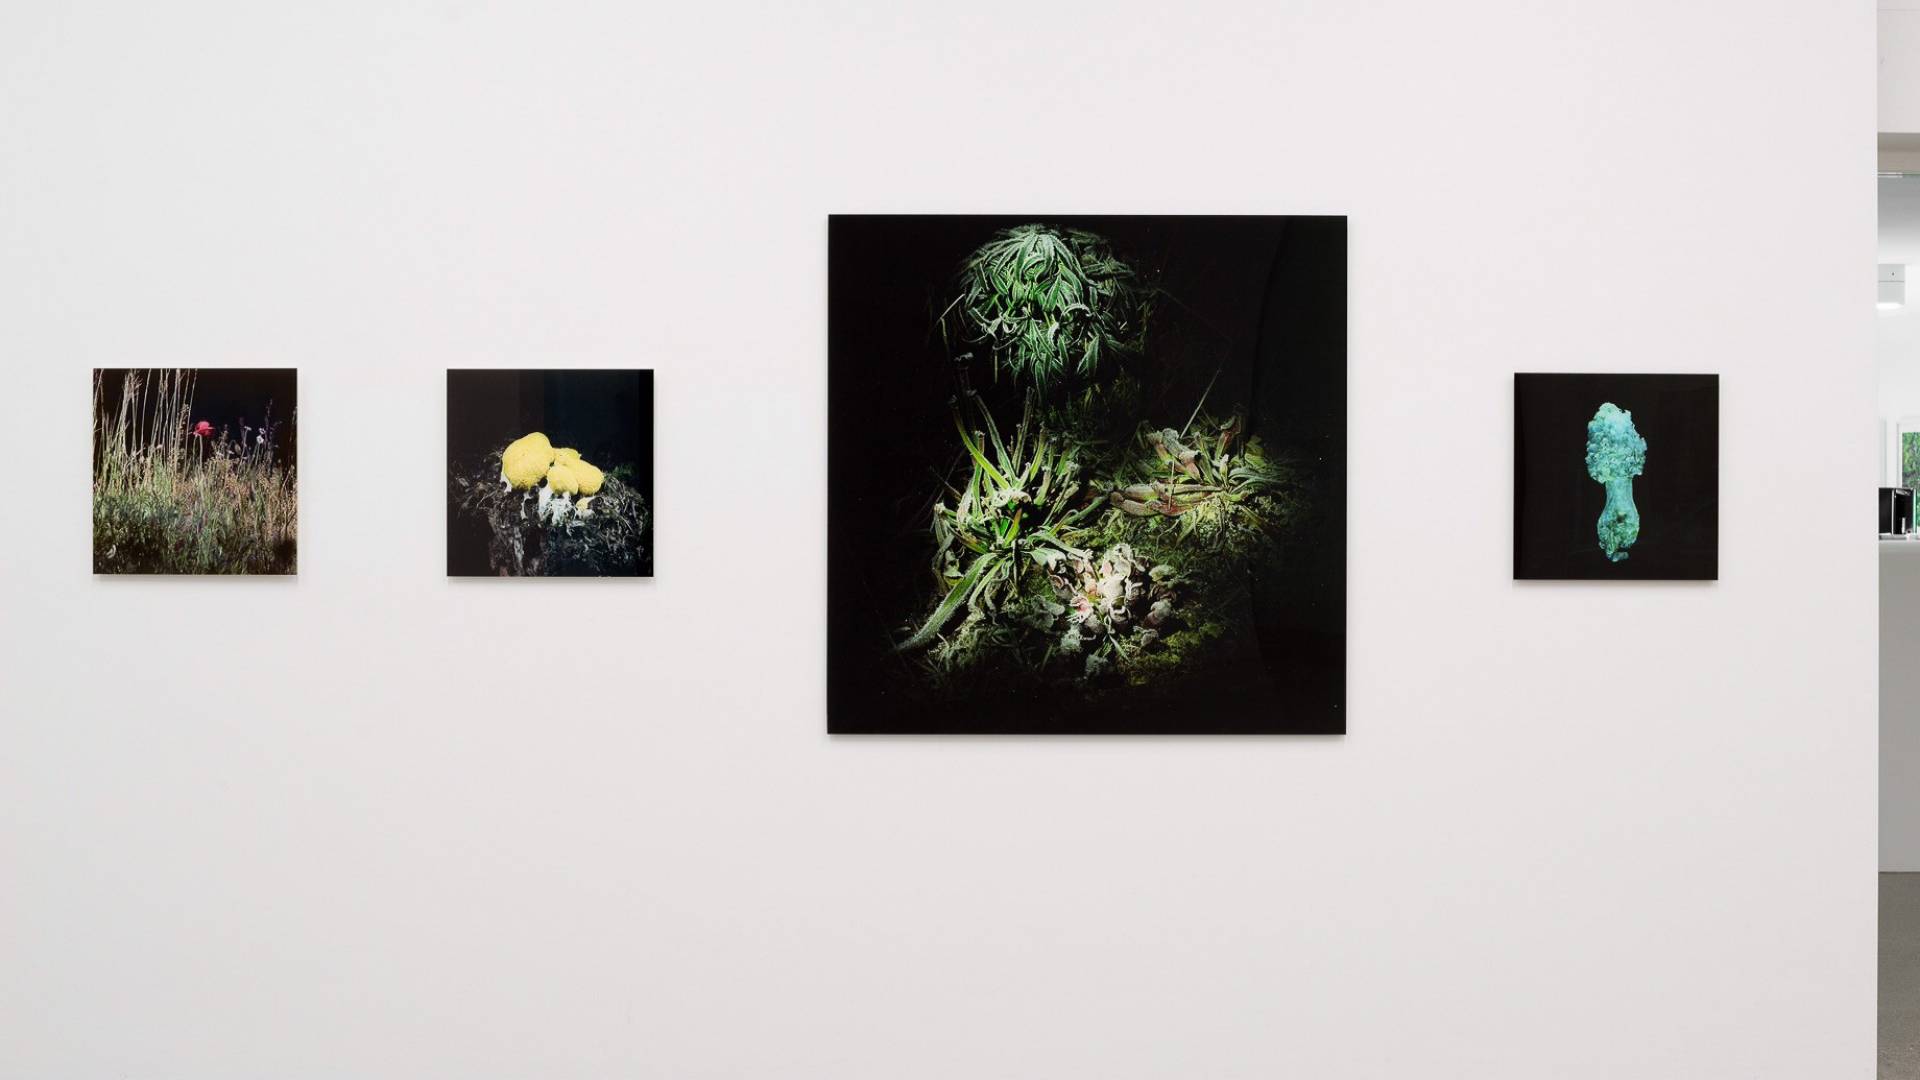 Pulled out of the darkness: Marianne Engel’s photographs show carnivorous plants found on night-time nature walks.